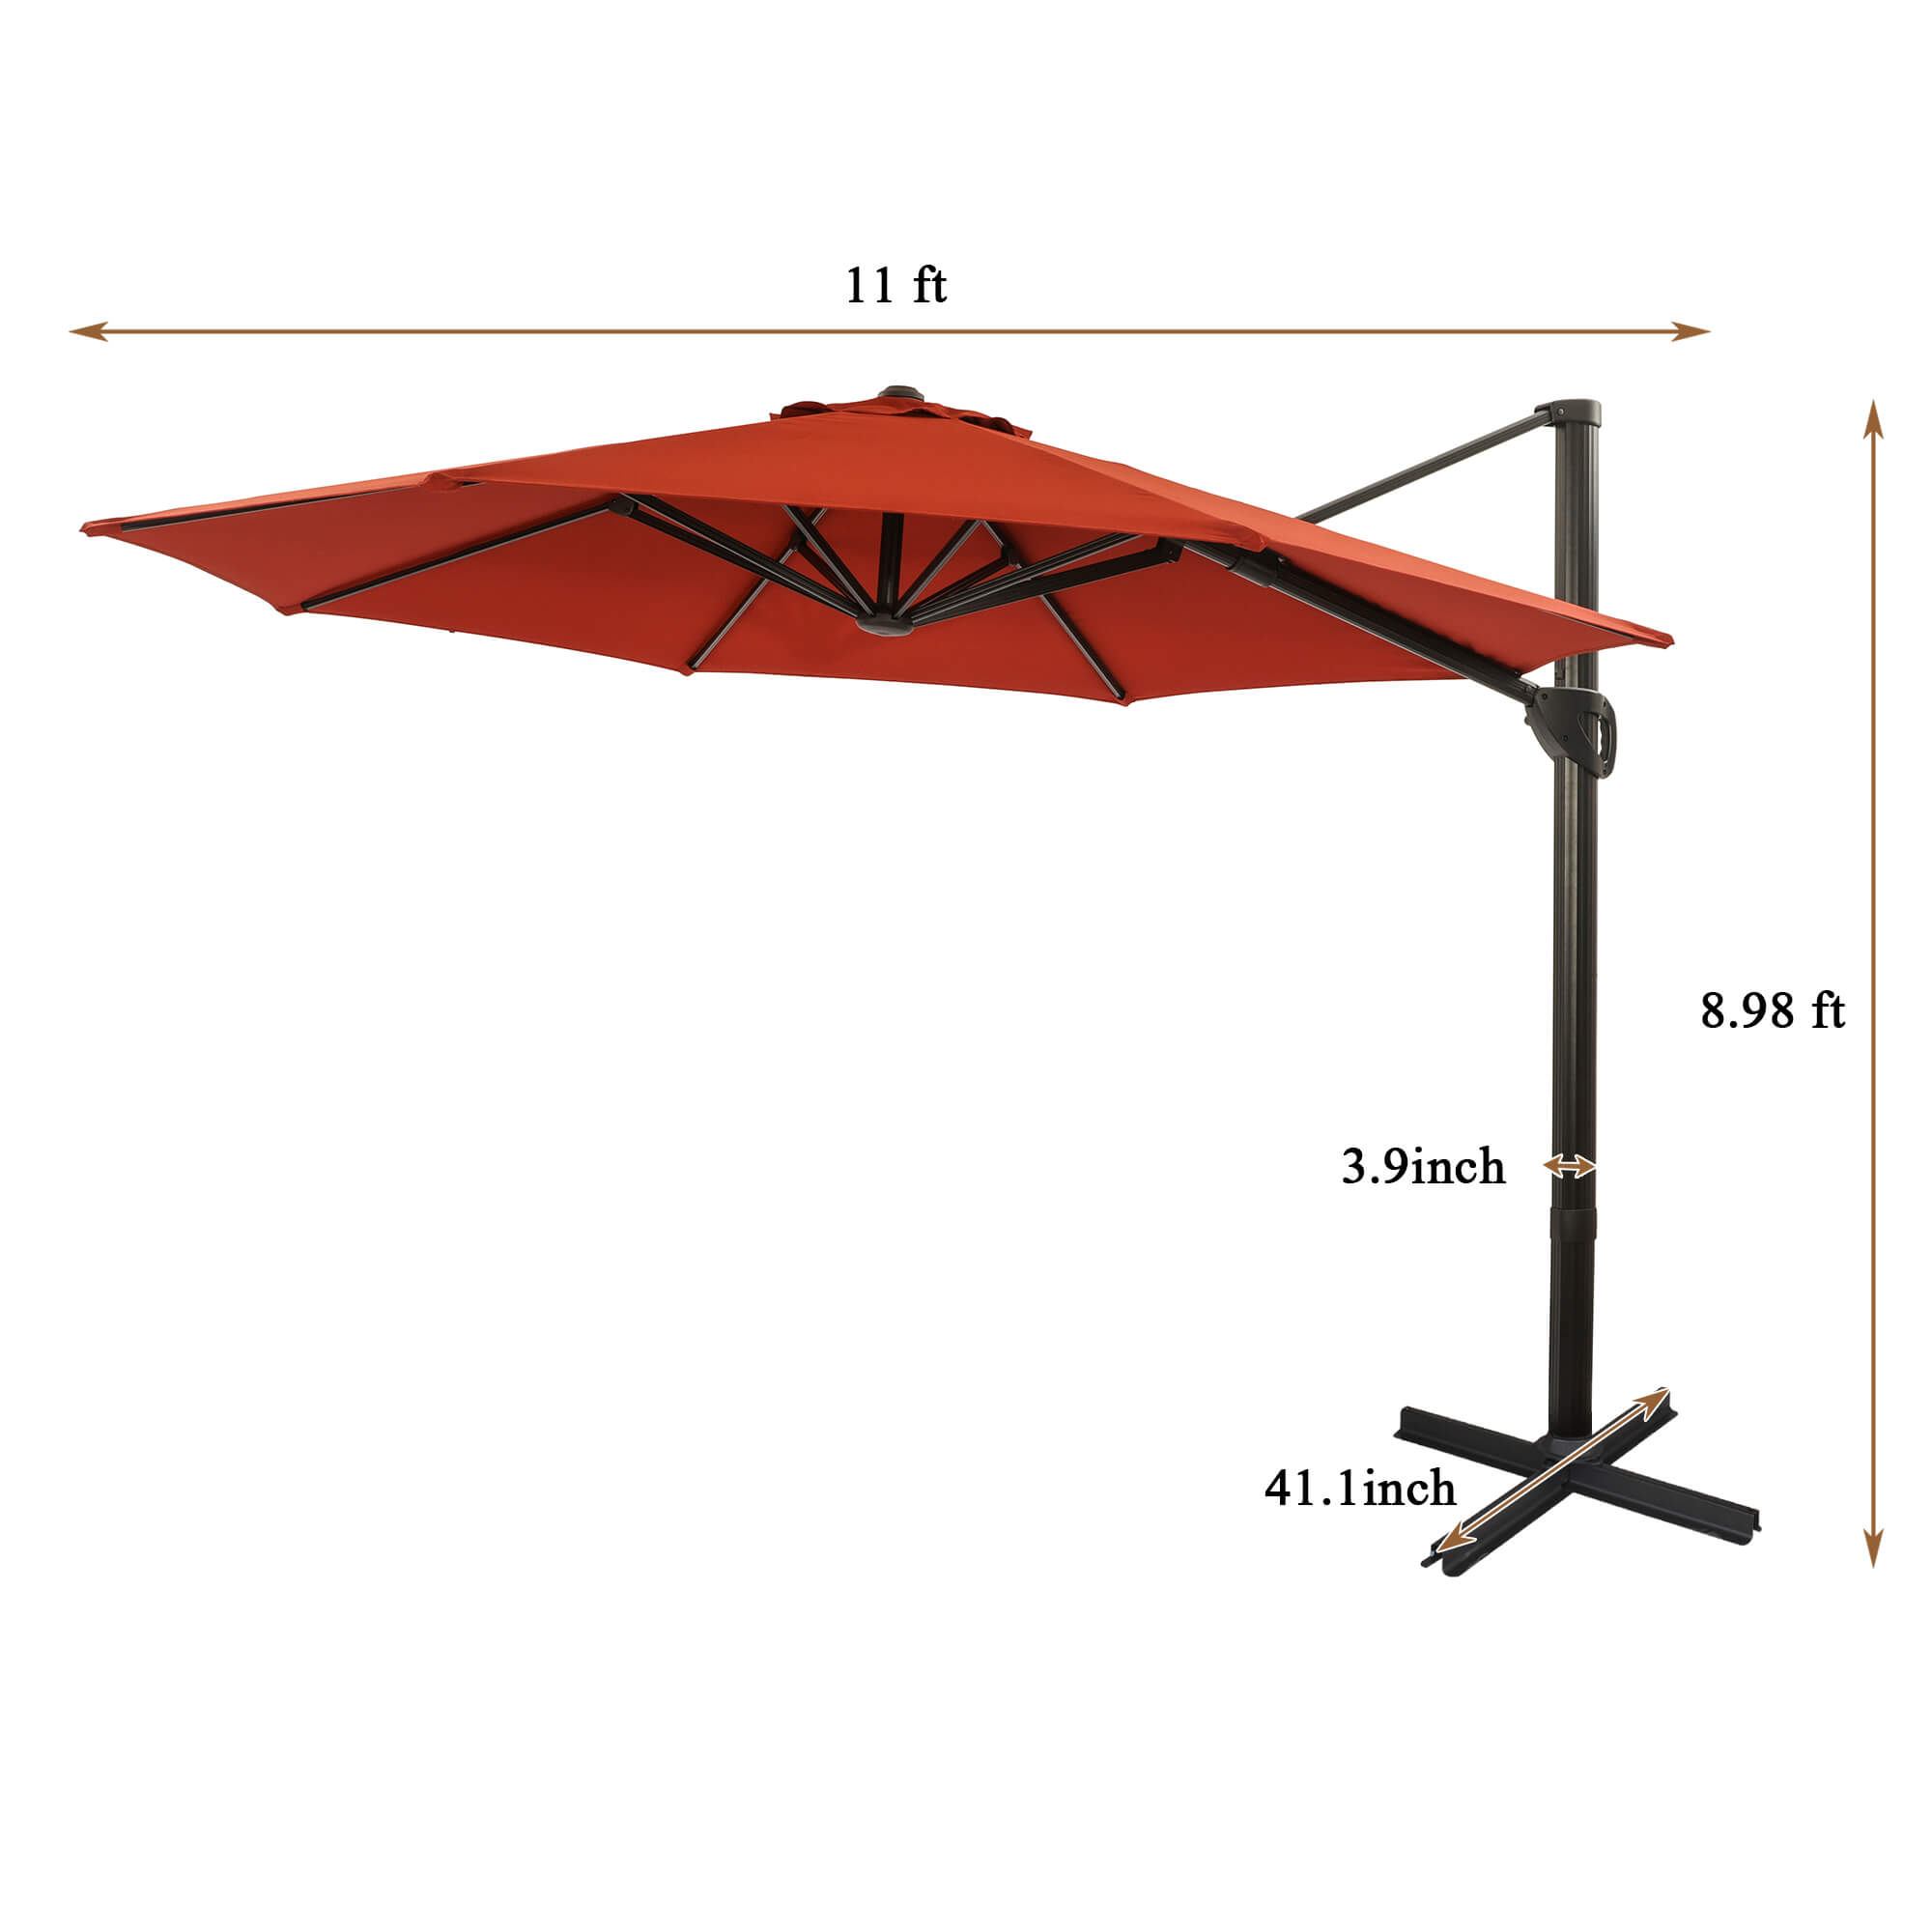 11 ft Patio Market Umbrella without Base Dimensions